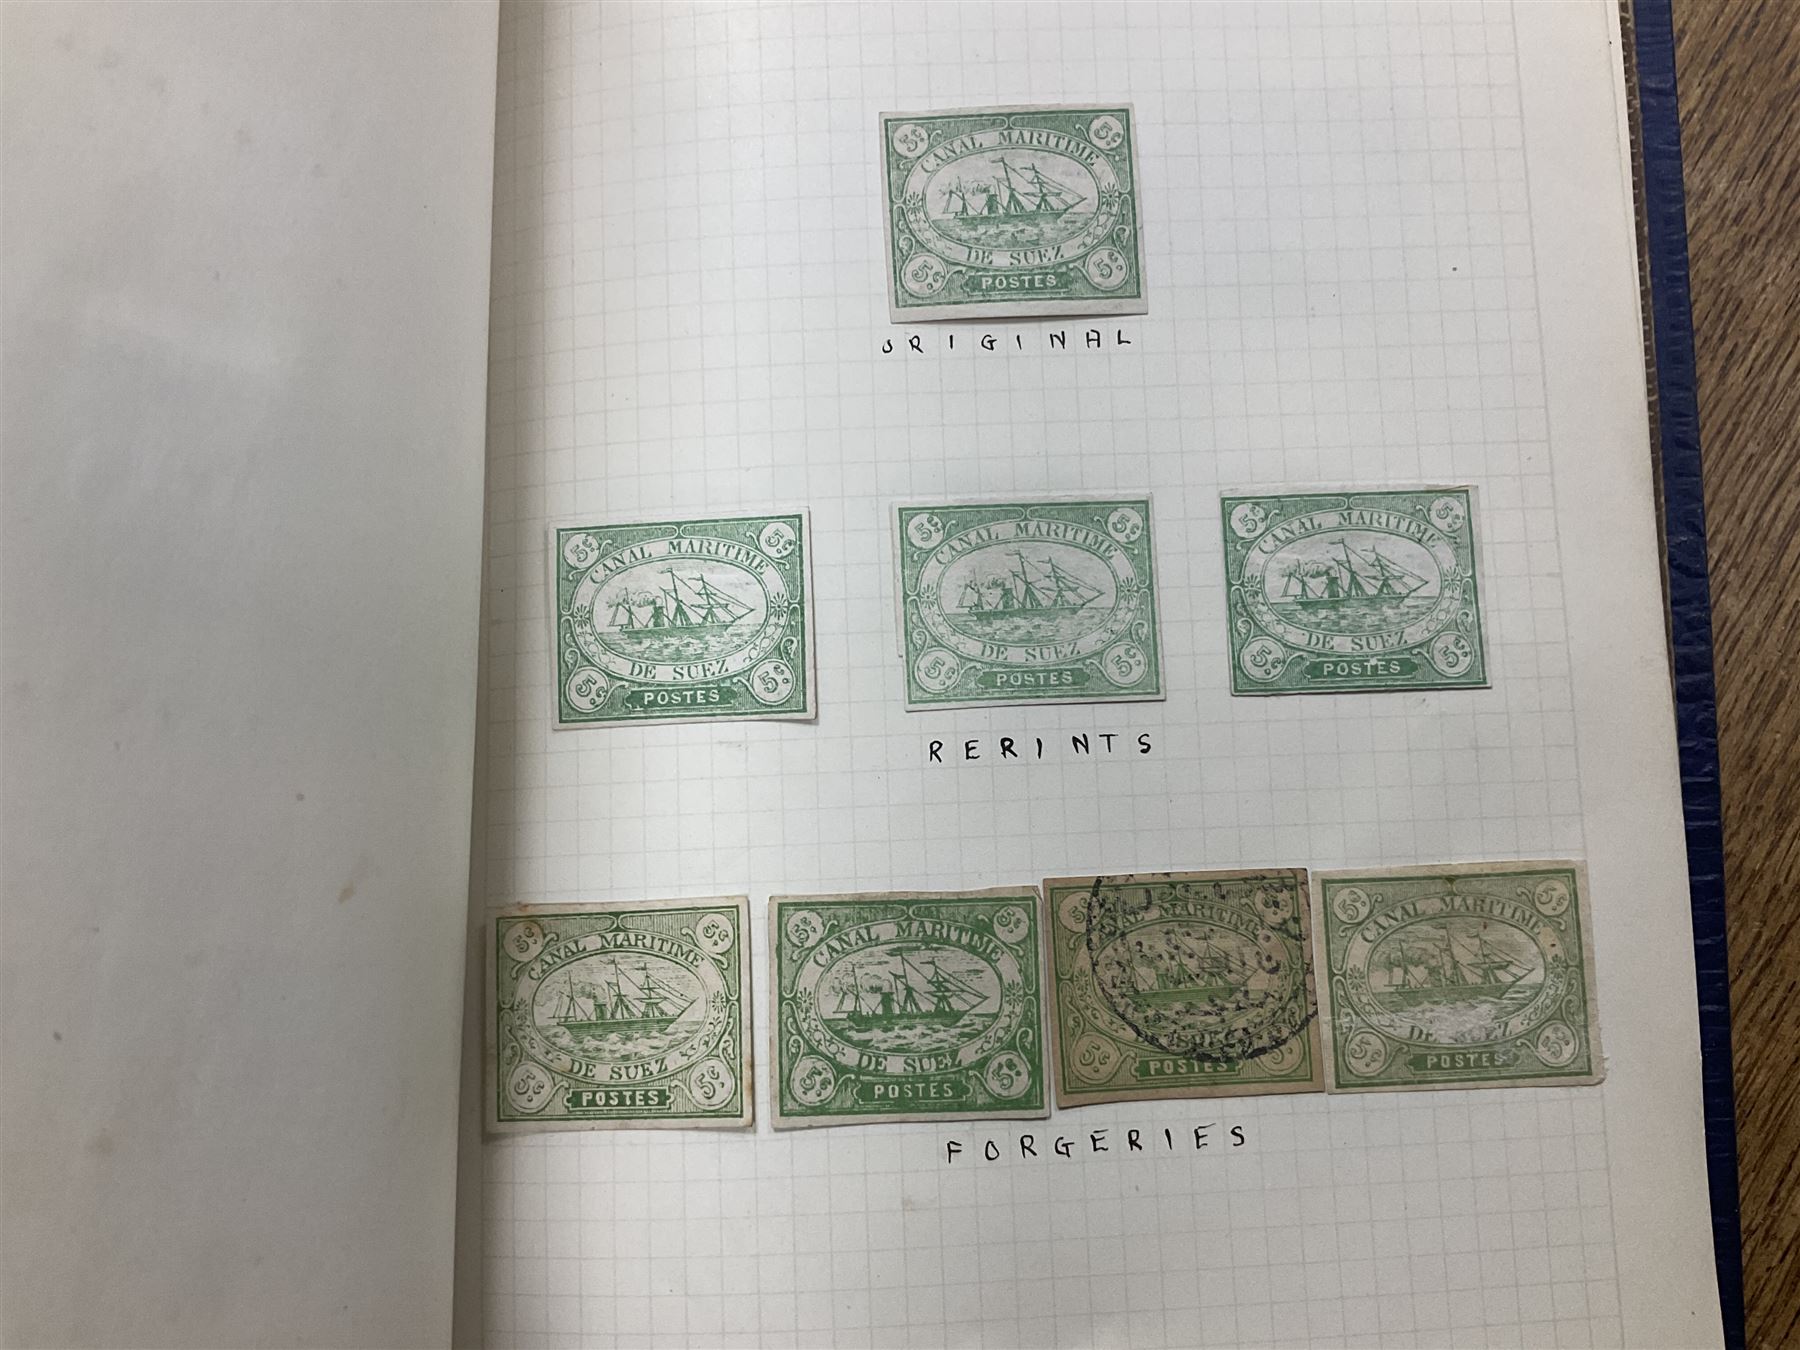 Egypt 1866 and later stamps - Image 376 of 761